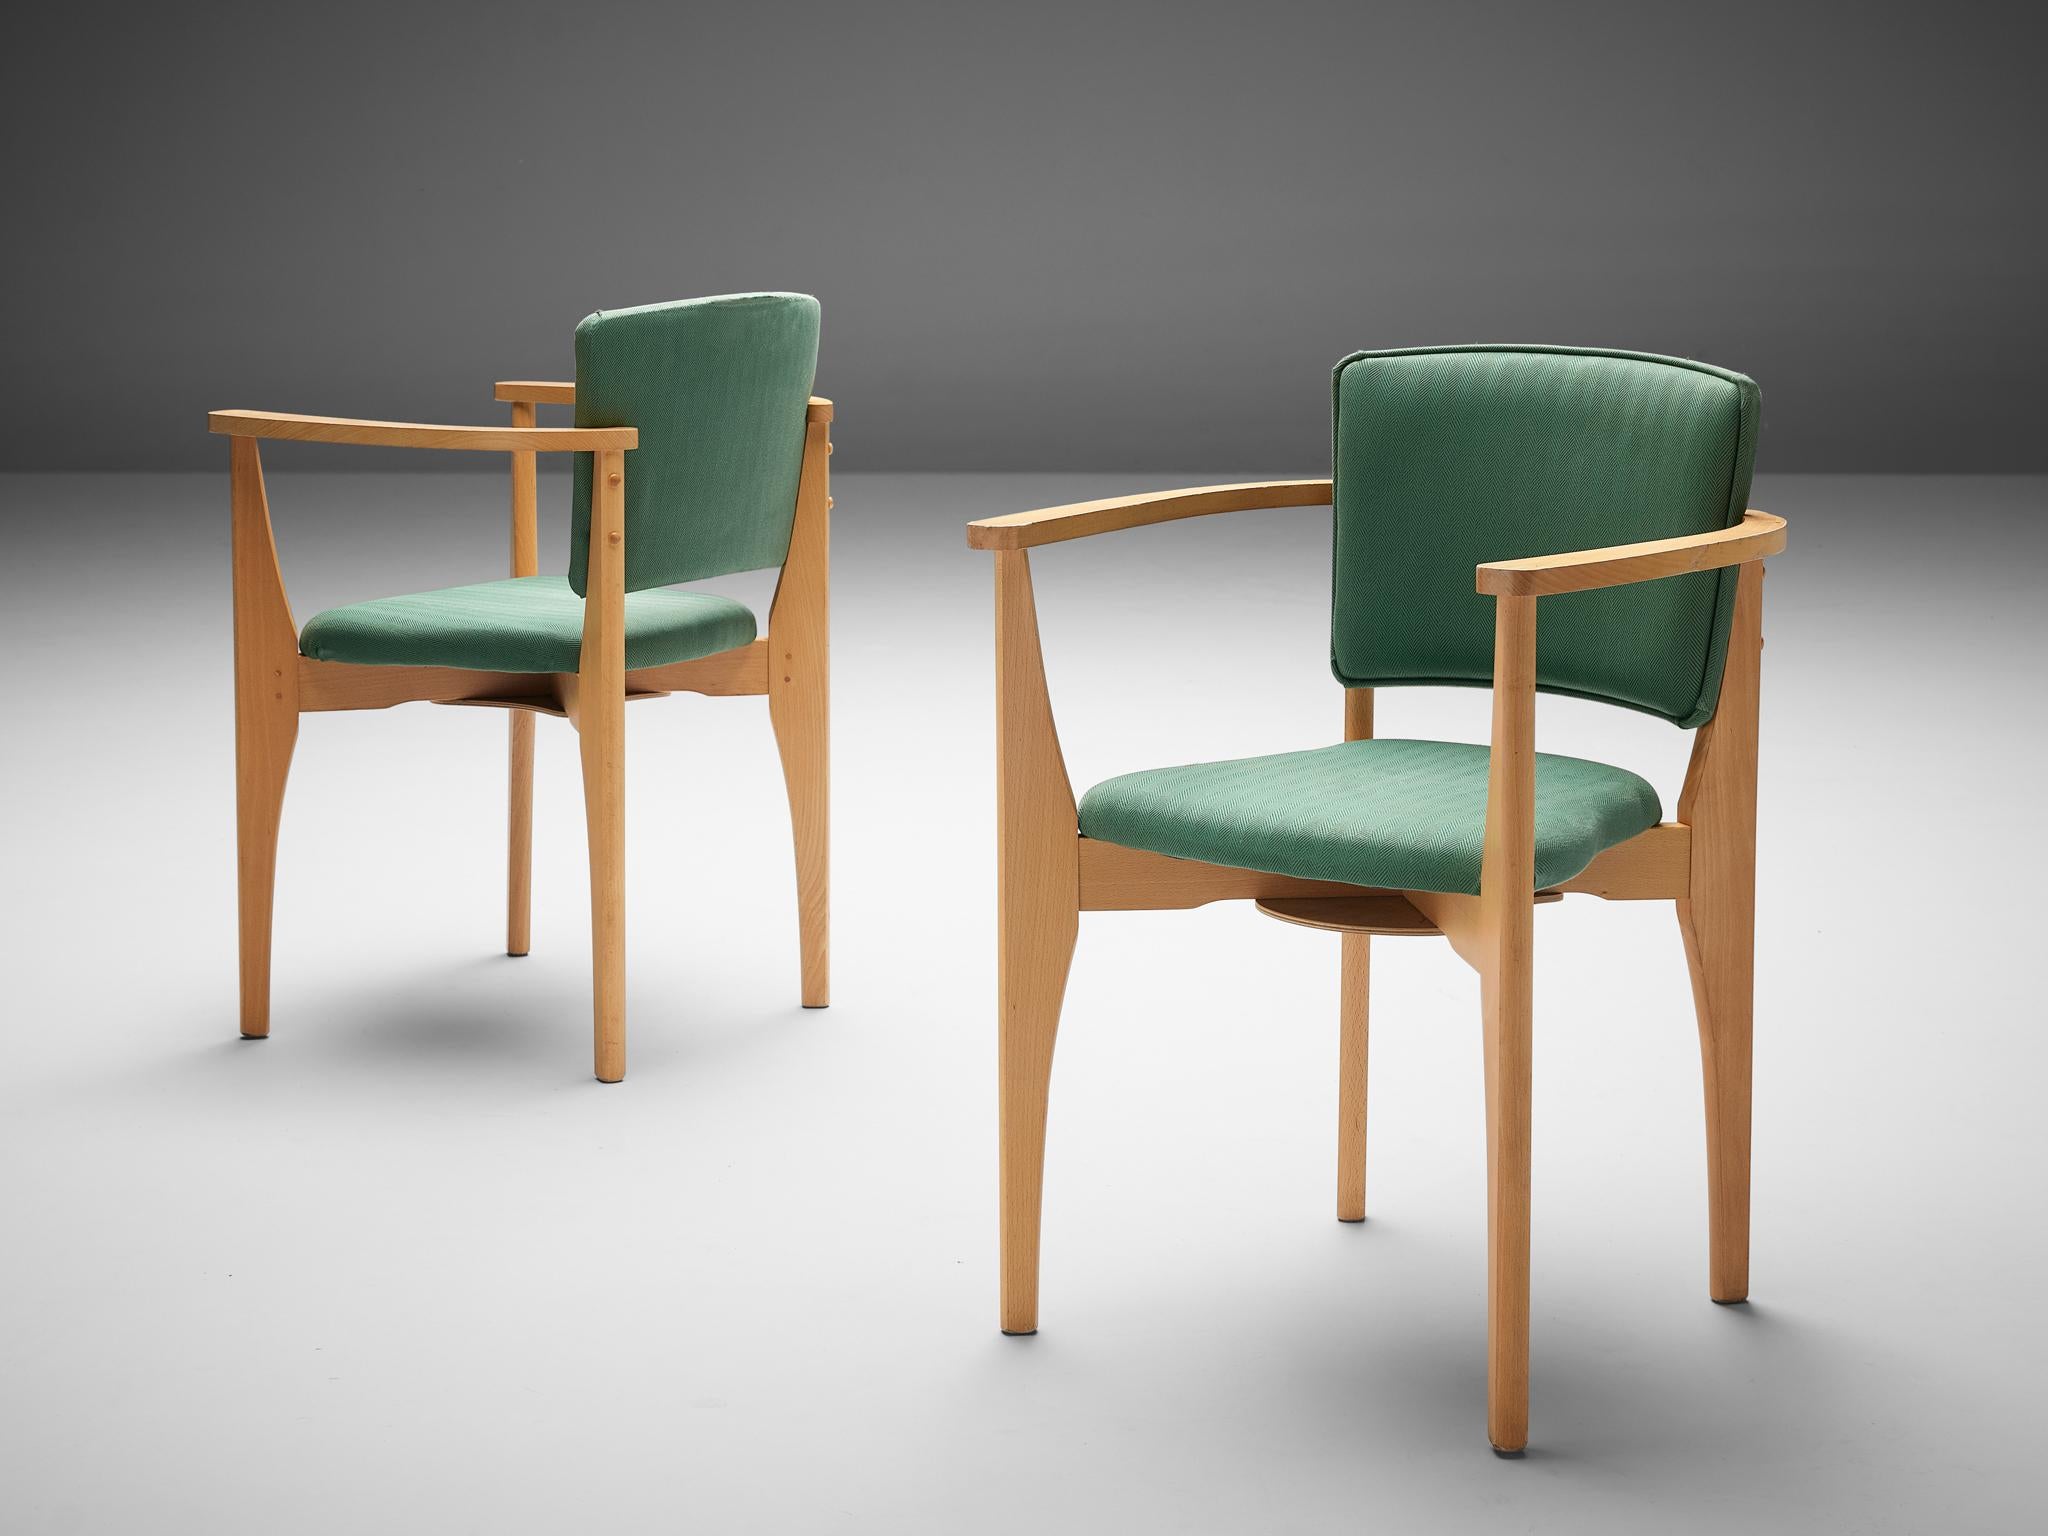 European Dining Chairs in Beech and Green Upholstery